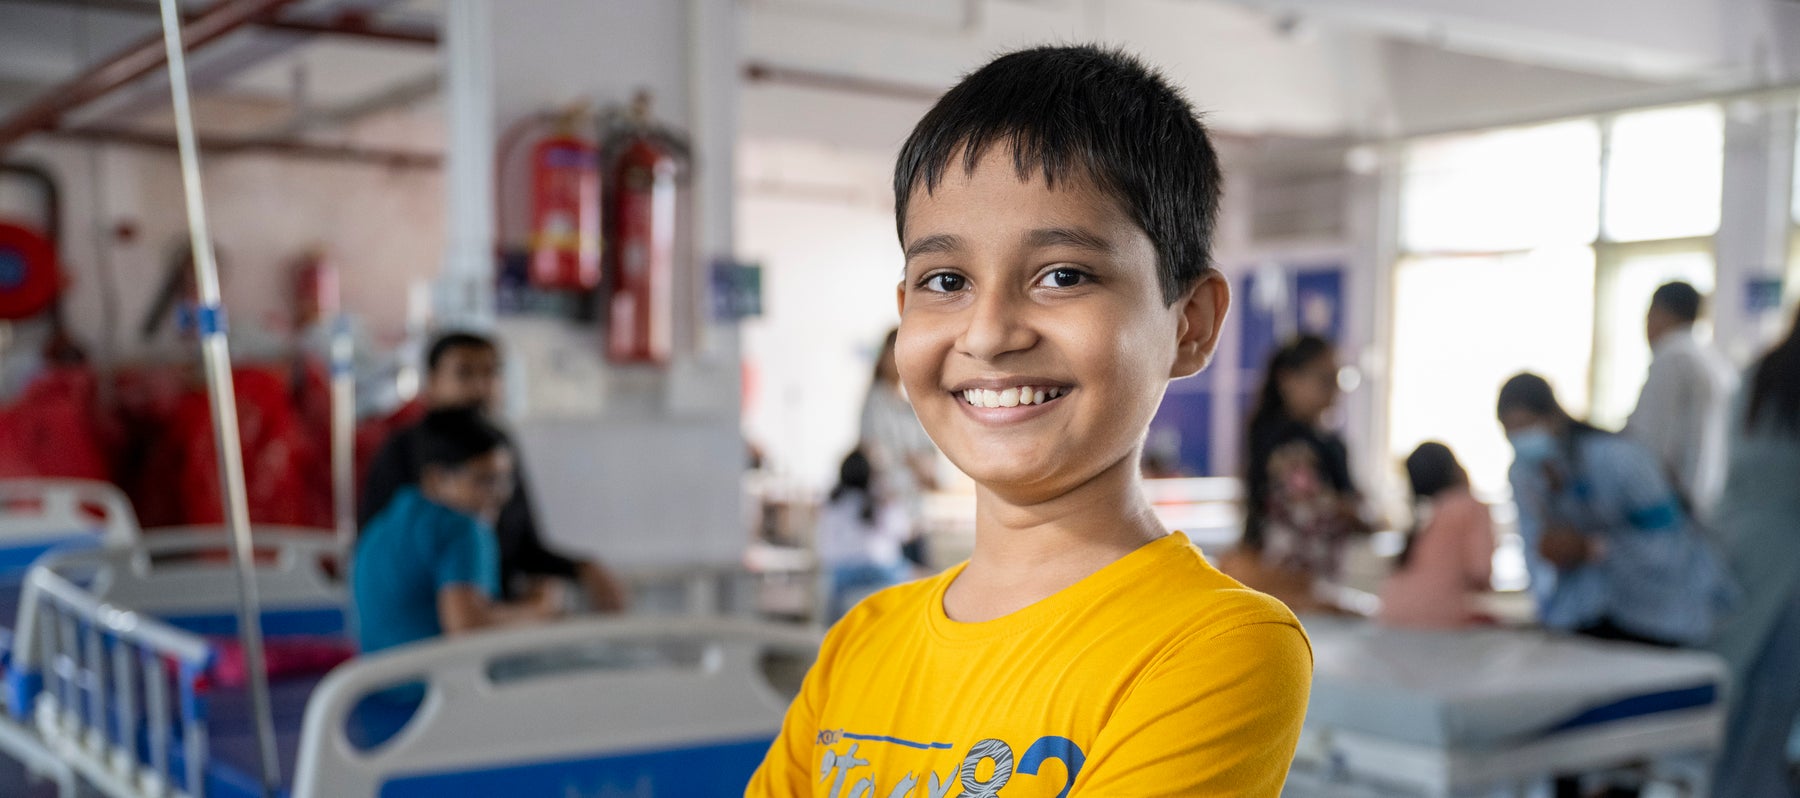 Munaf, 11, is happy and healthy after recovering from a COVID-associated illness in May 2021.